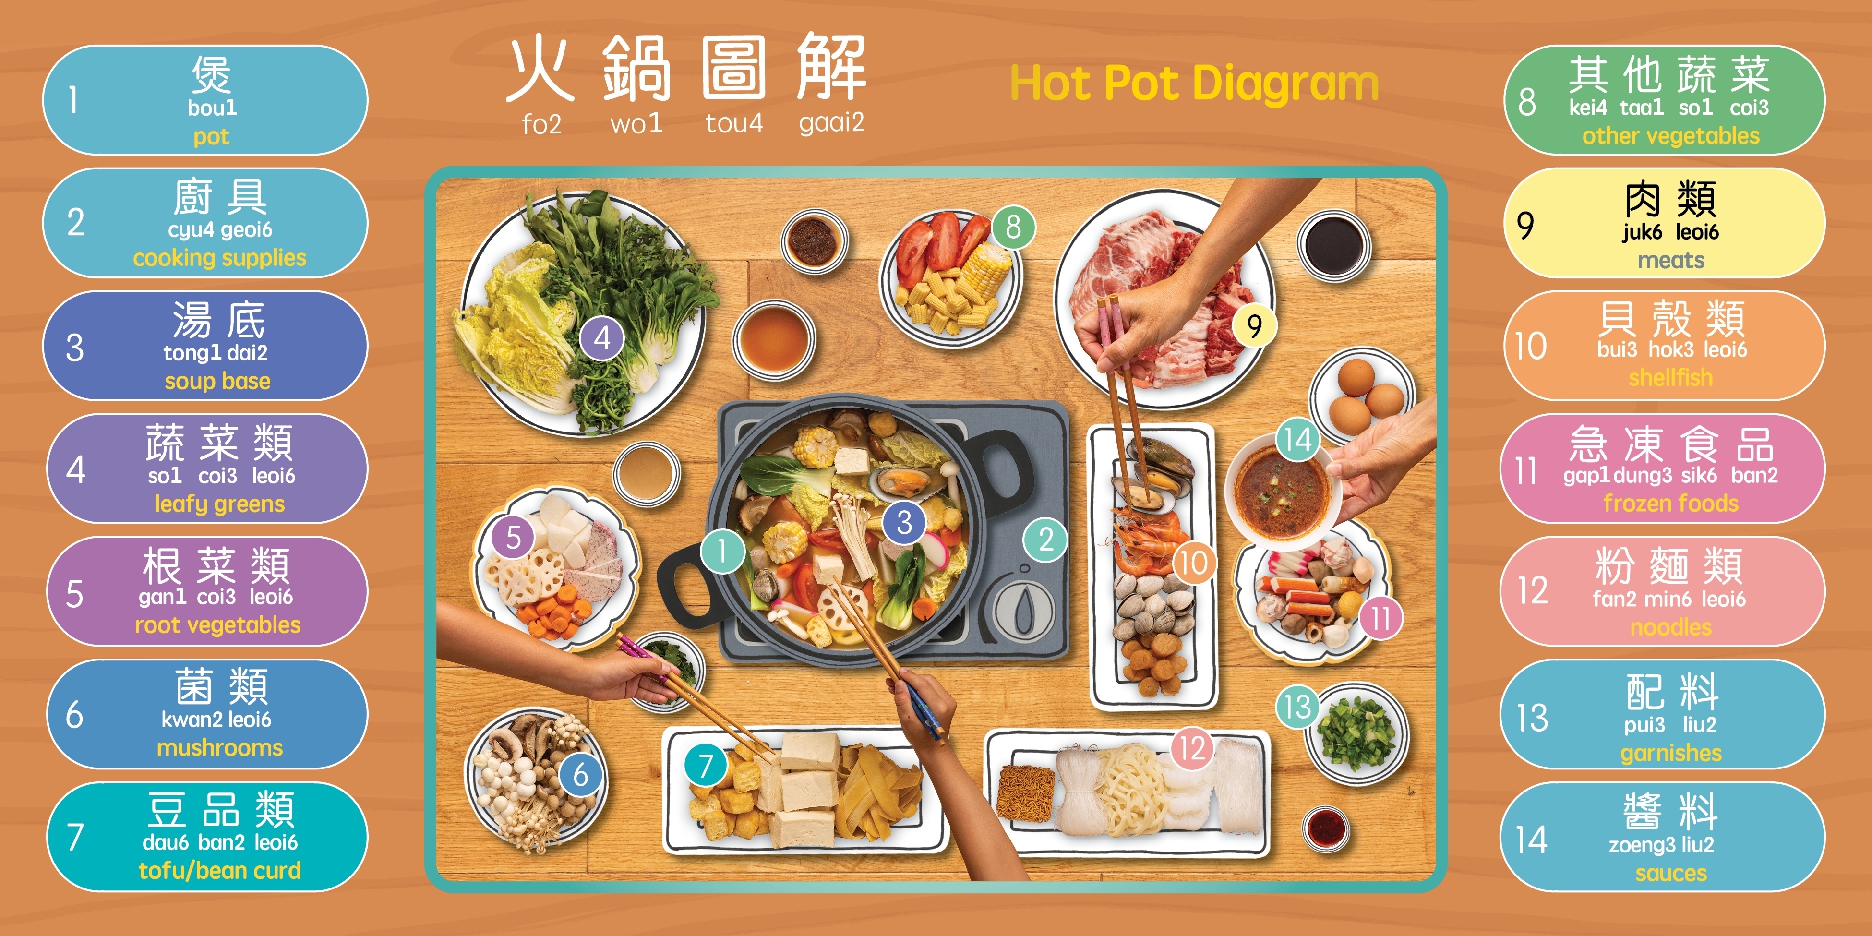 It's Time for Hot Pot - Cantonese